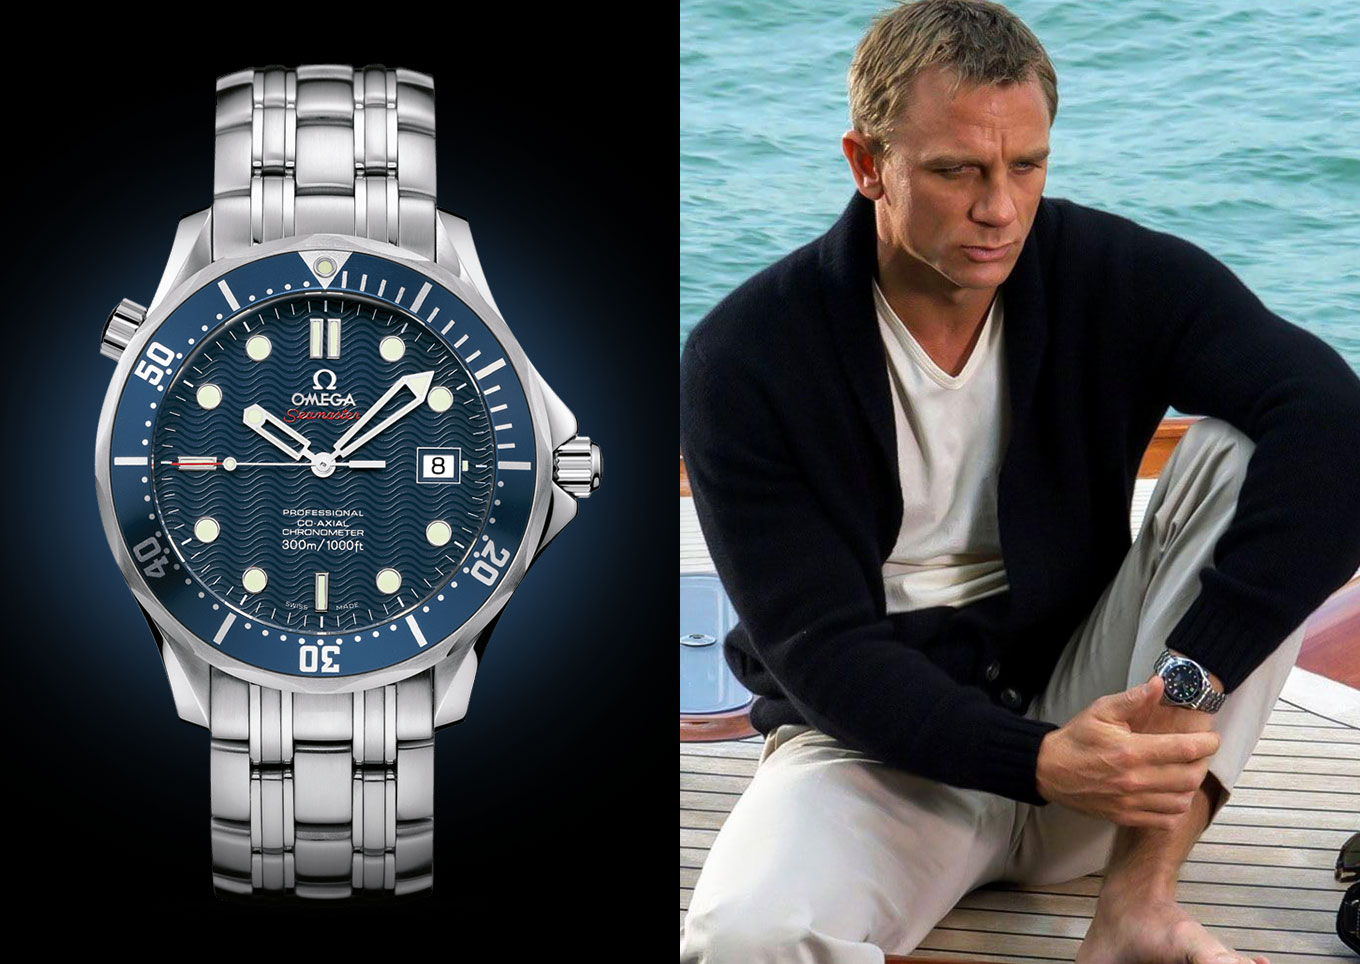 James Bond in Omega watches